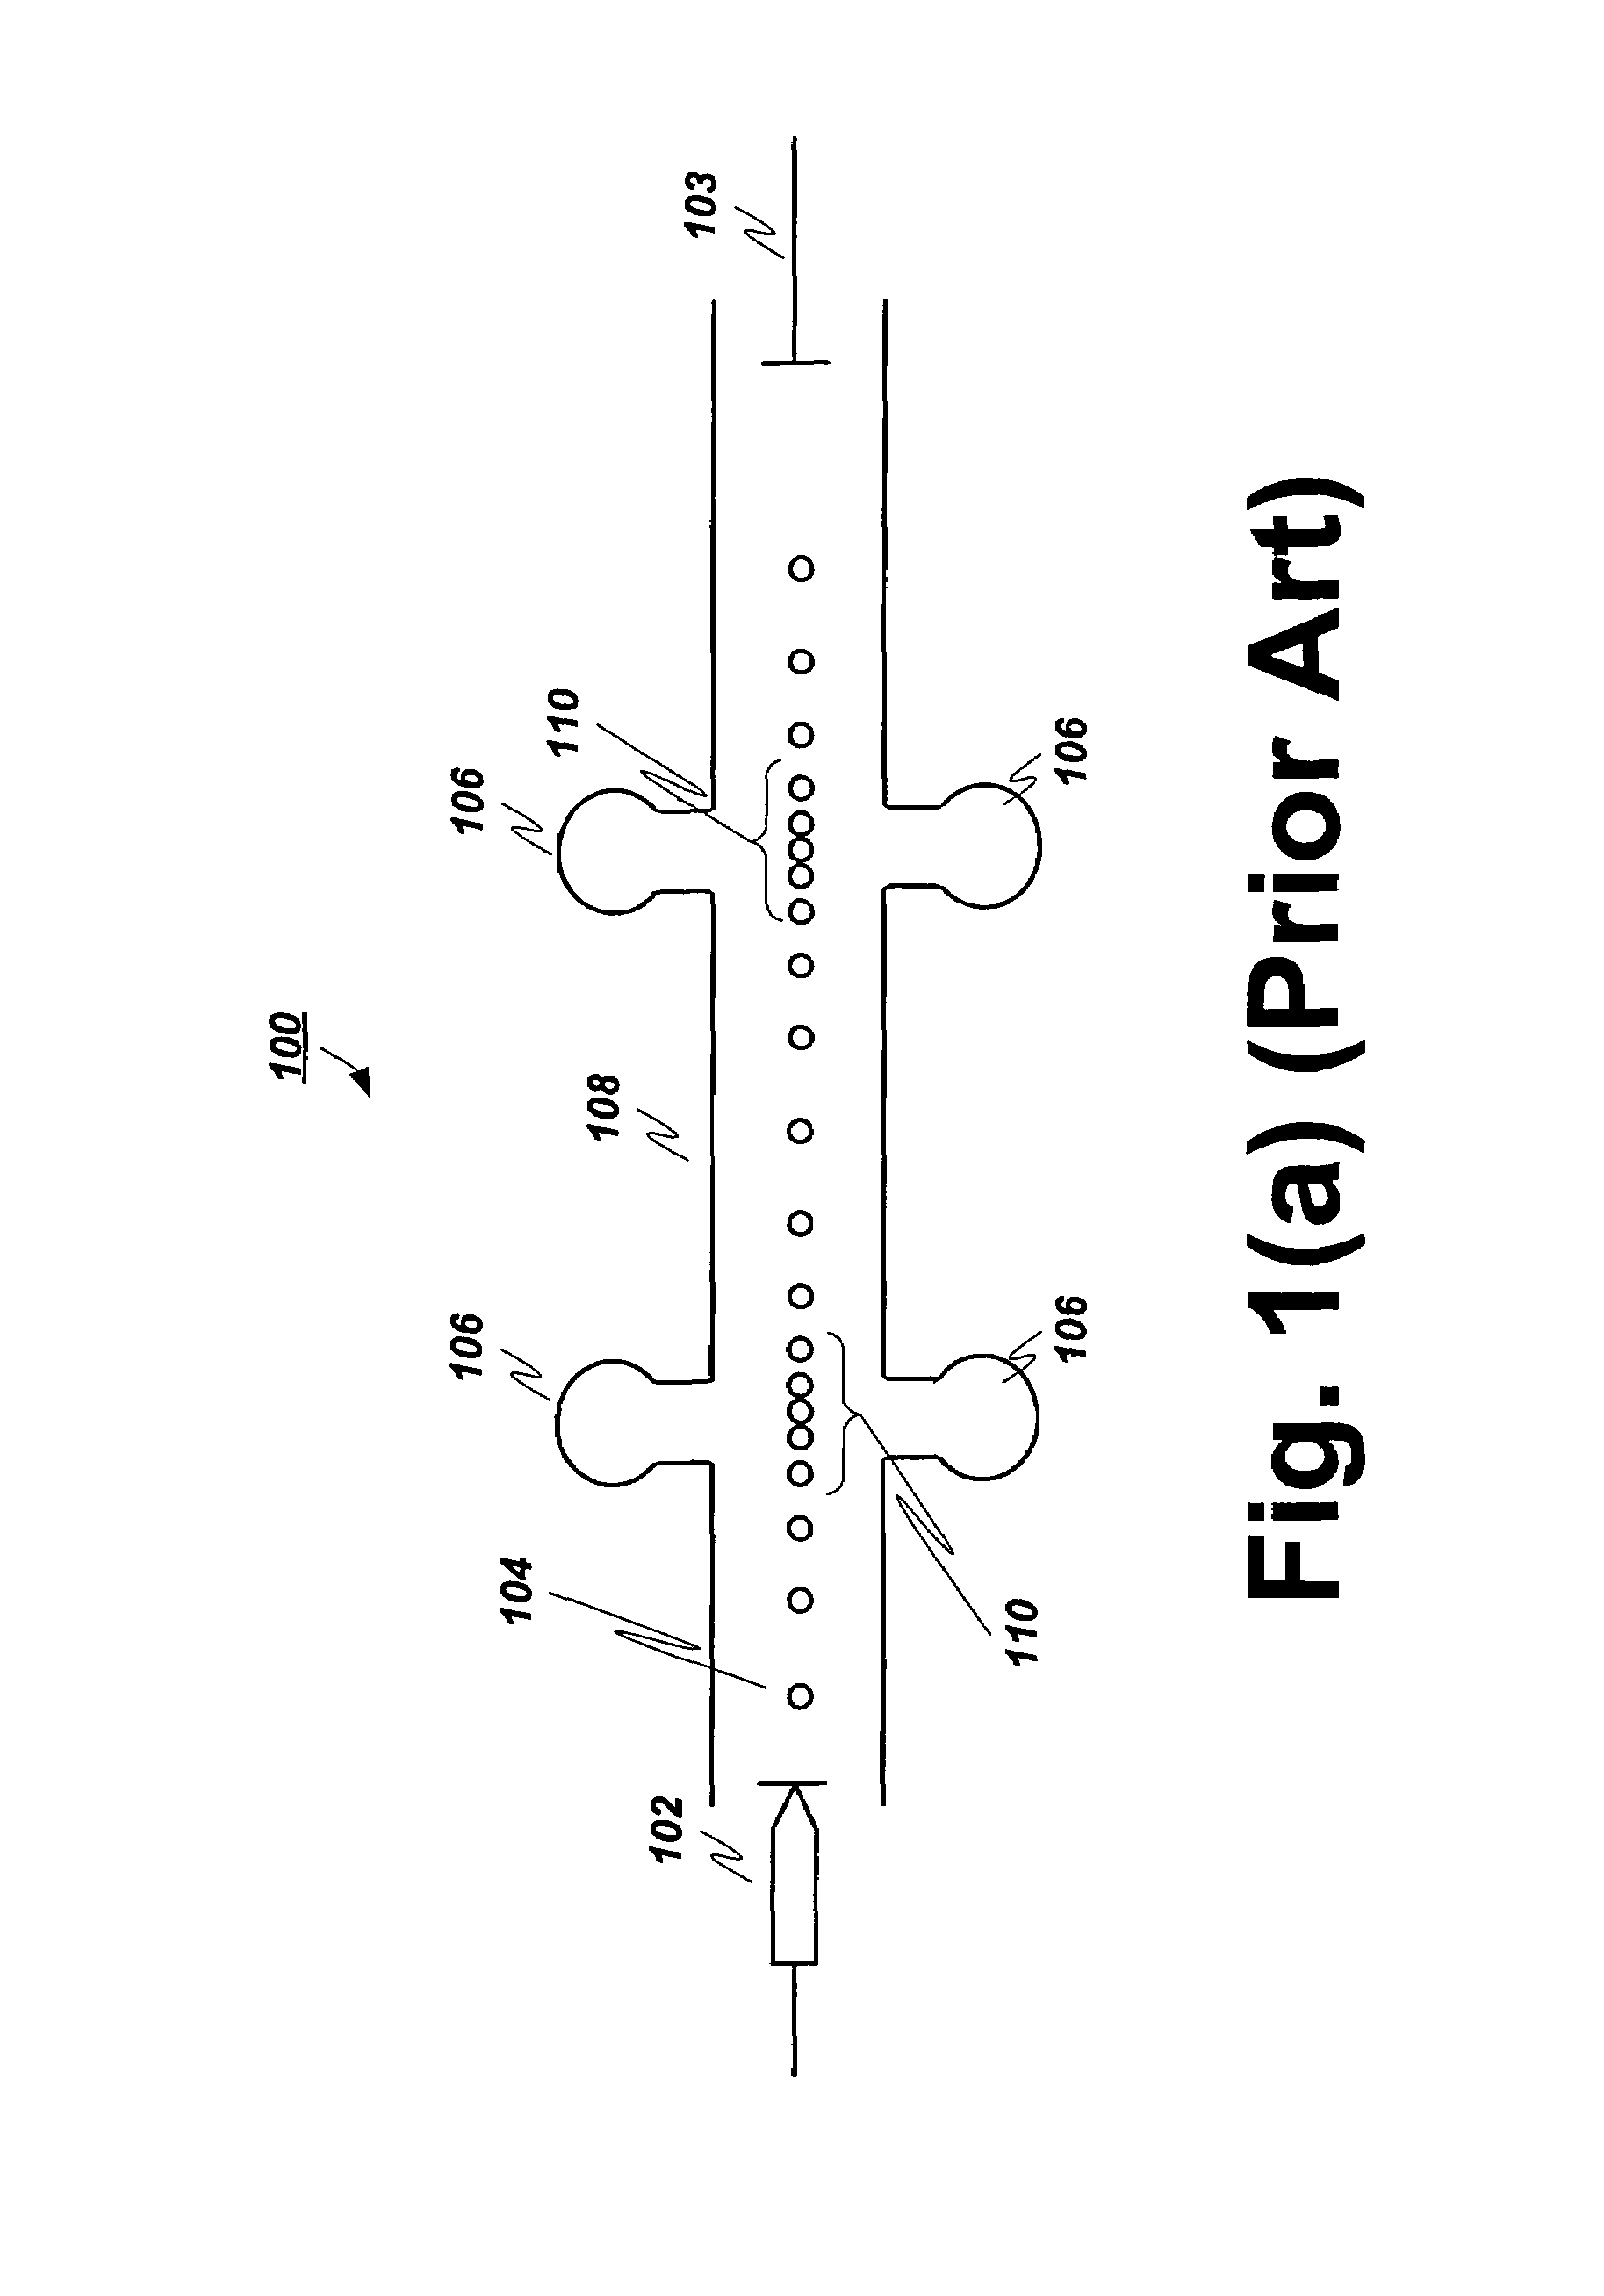 Structures and methods for coupling energy from an electromagnetic wave